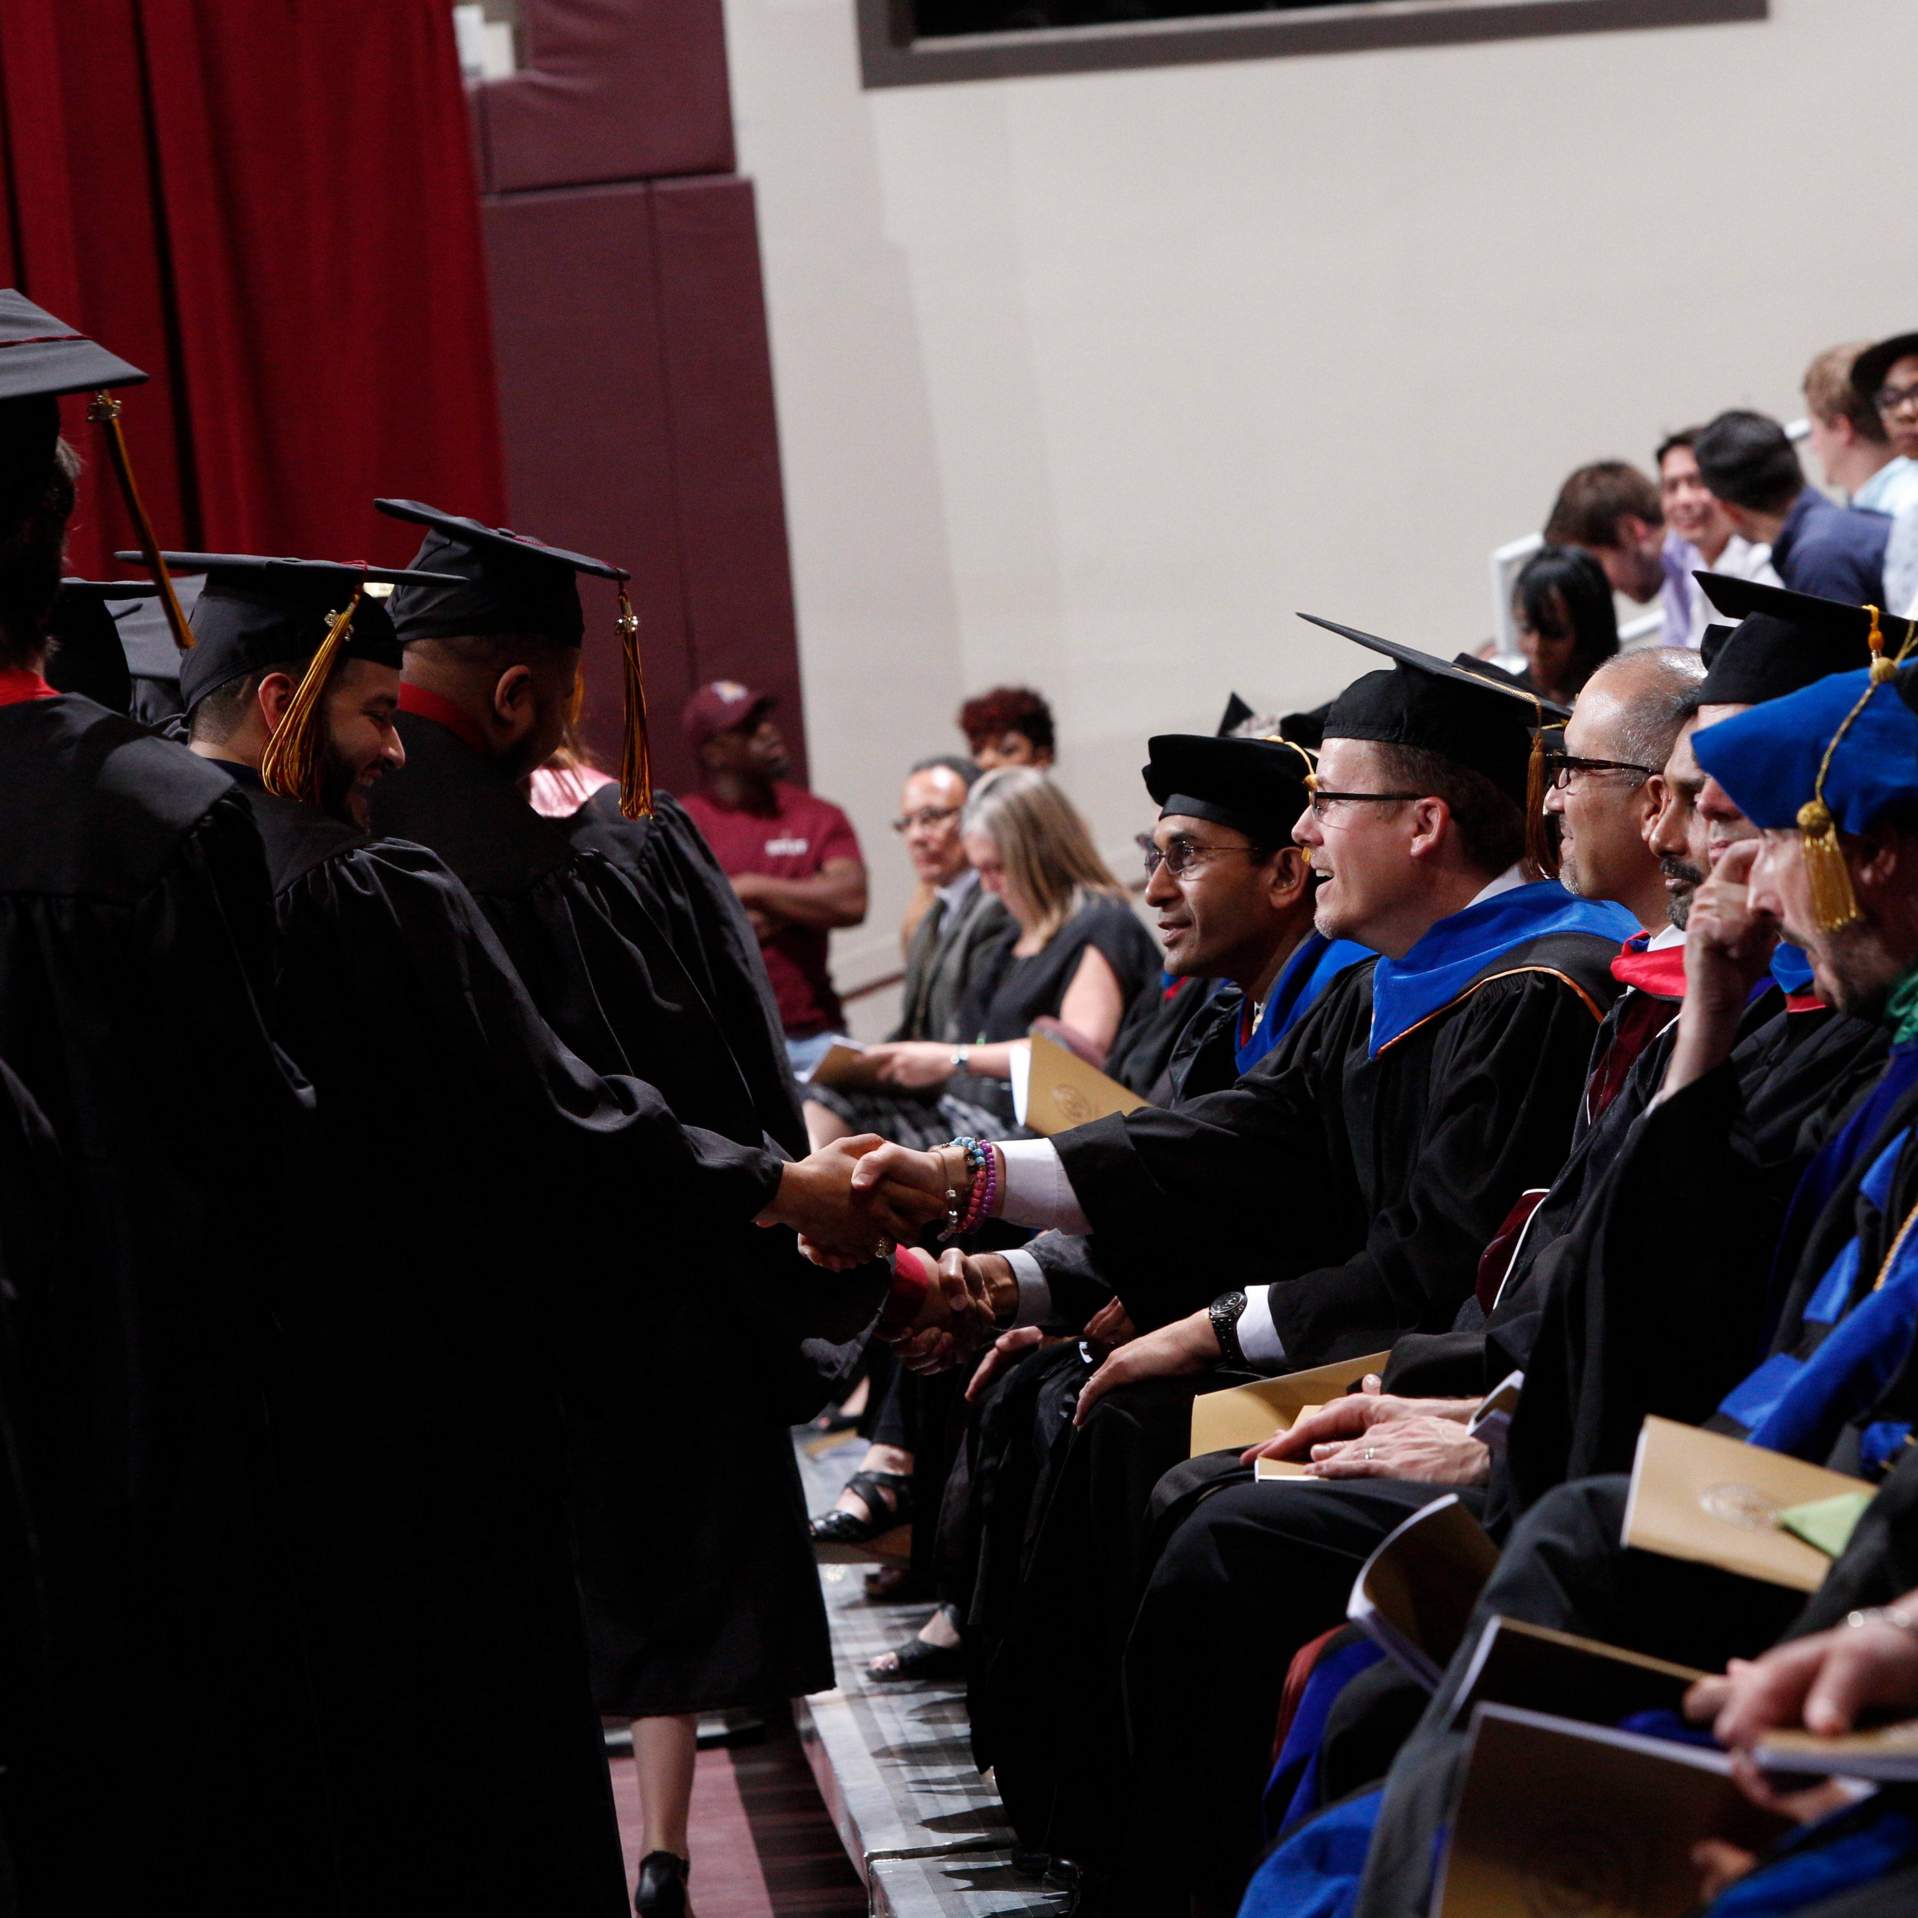 Faculty members congratulate their graduating students as they line up to receive their diploma and shake hands with the President of Texas State University at a Spring 2016 commencement ceremony.